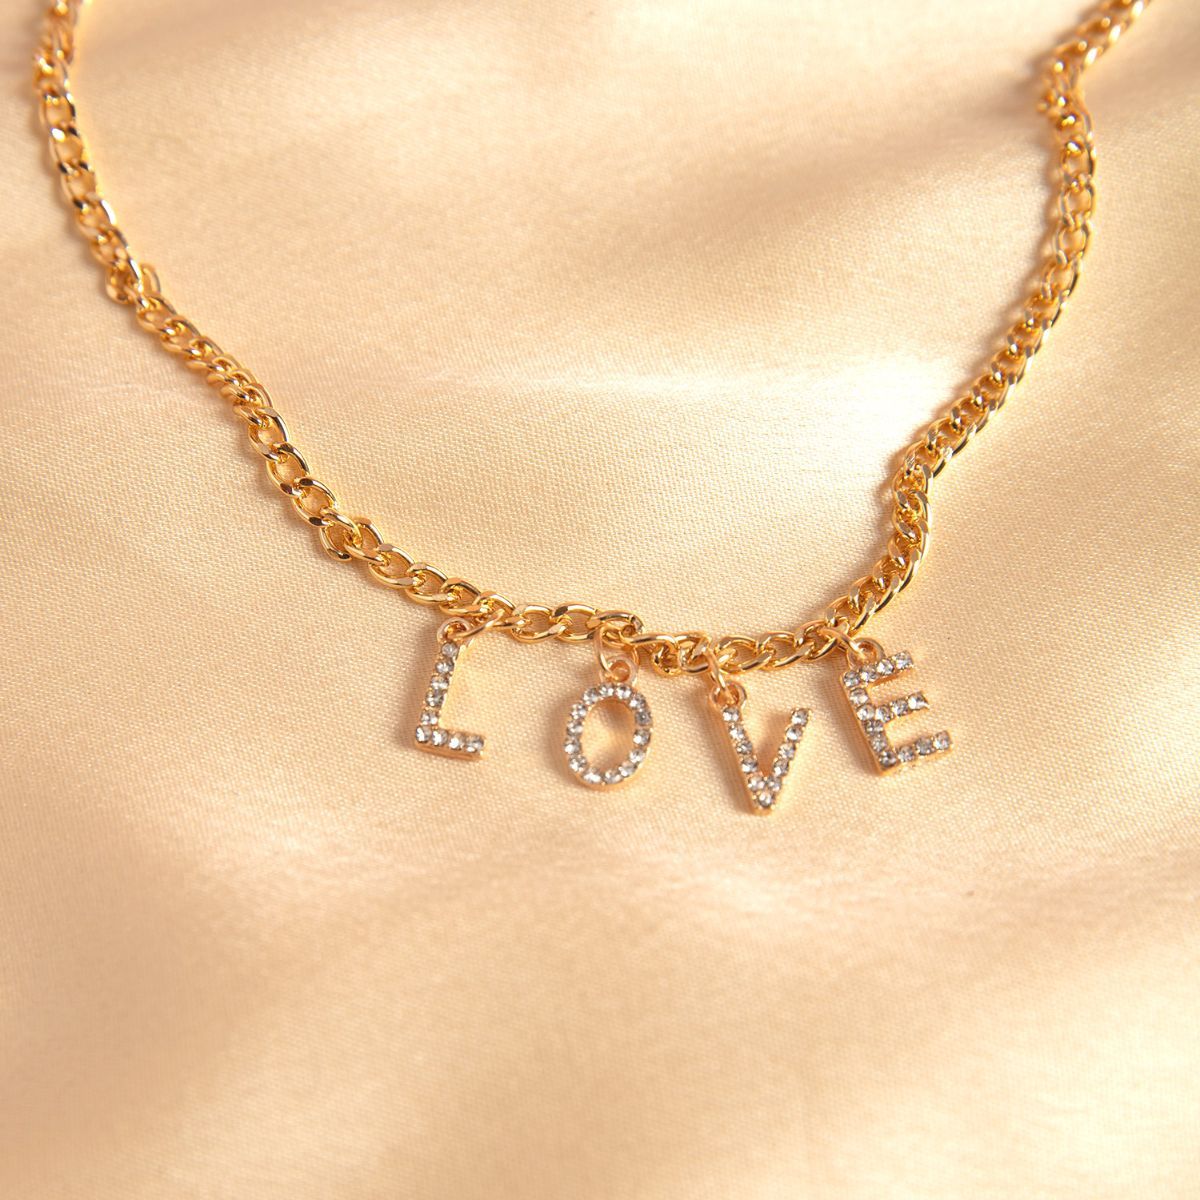 Gold Love Studded Chain Necklace